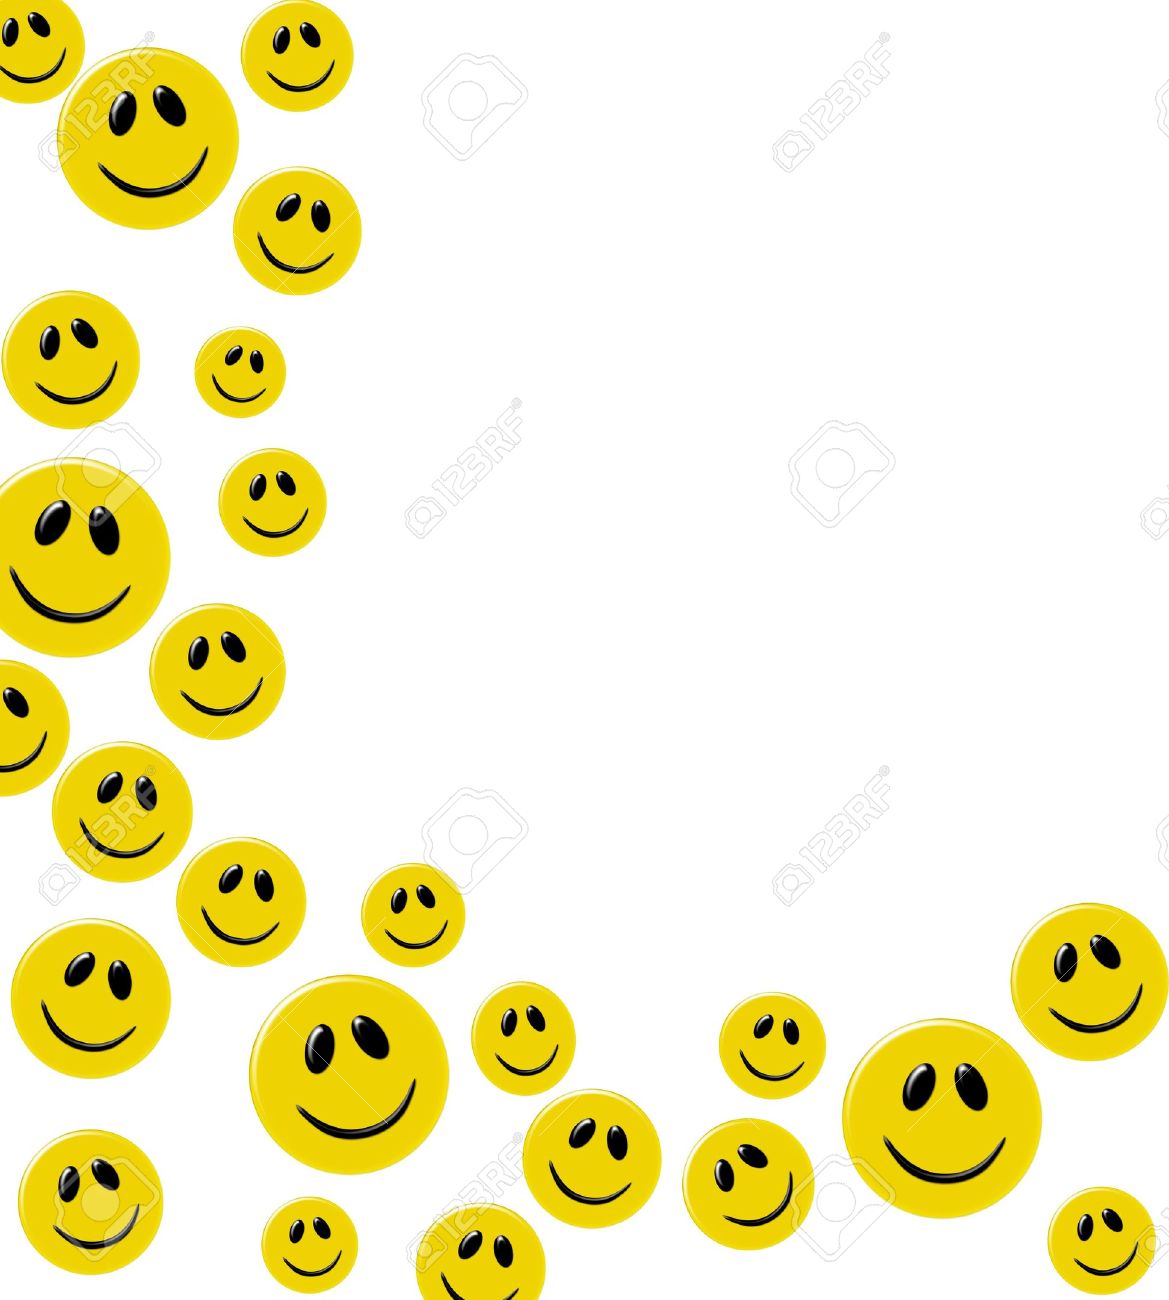 Smiley Faces Background   CNSouP Collections